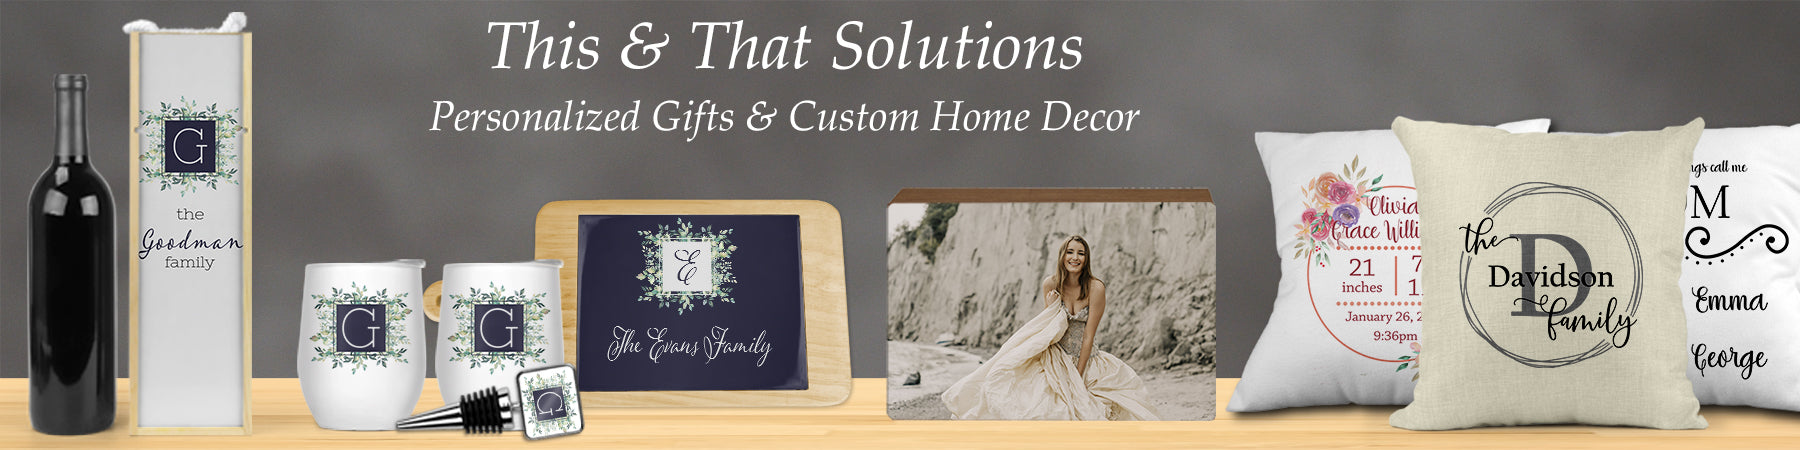 This & That Solutions - Personalized Gifts & Custom Home Decor